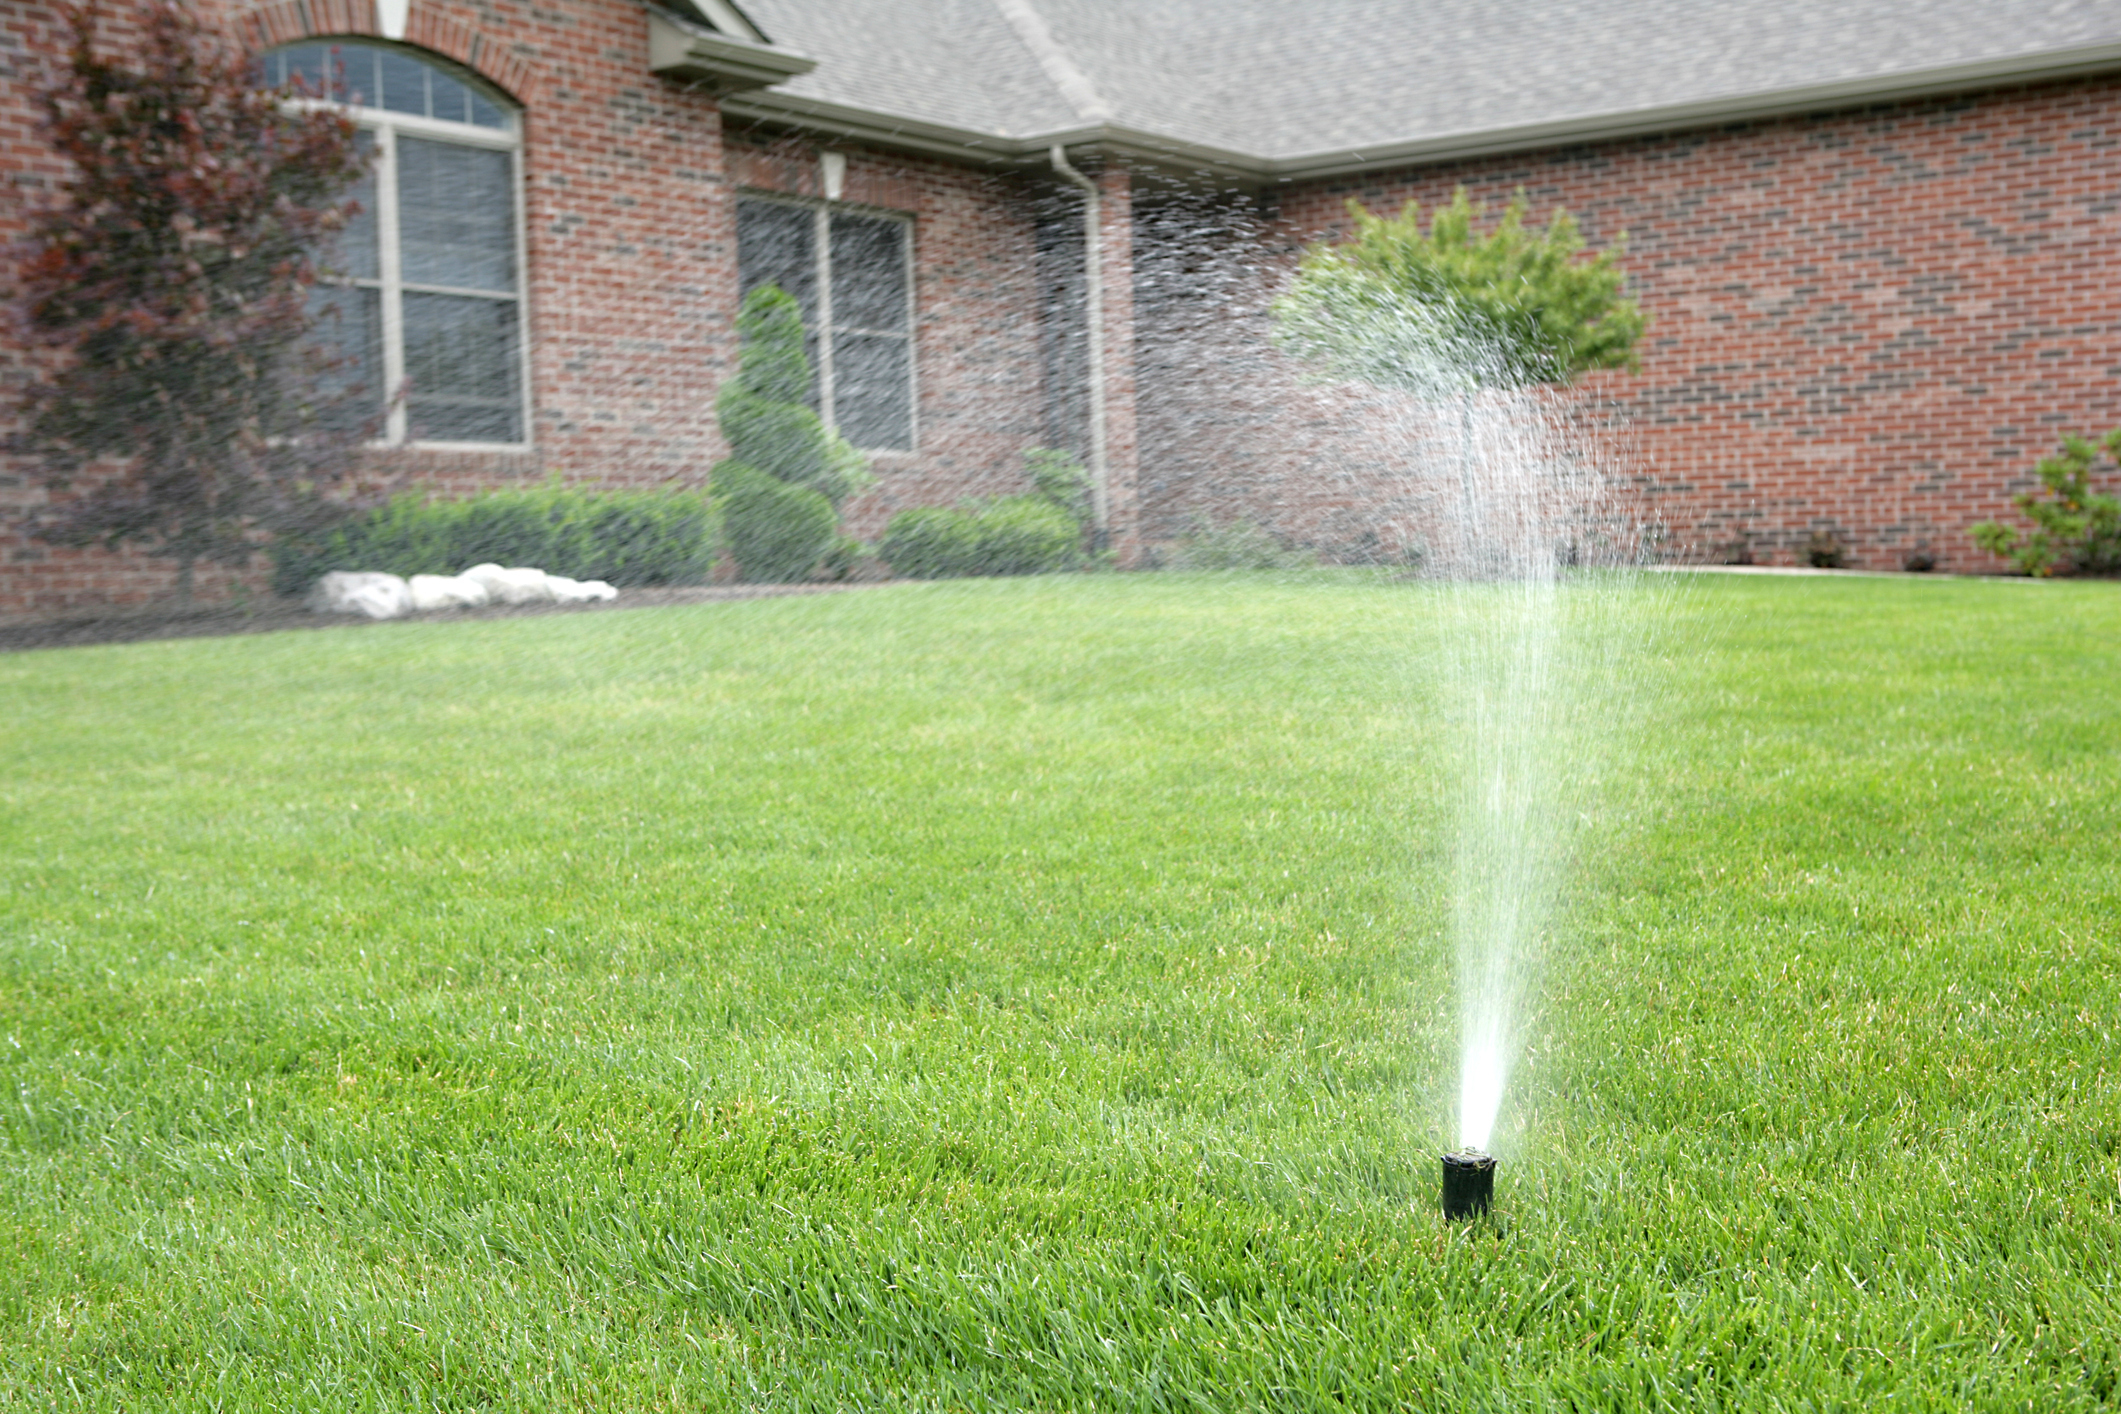 American lawns use 9 billion gallons of water per day. 